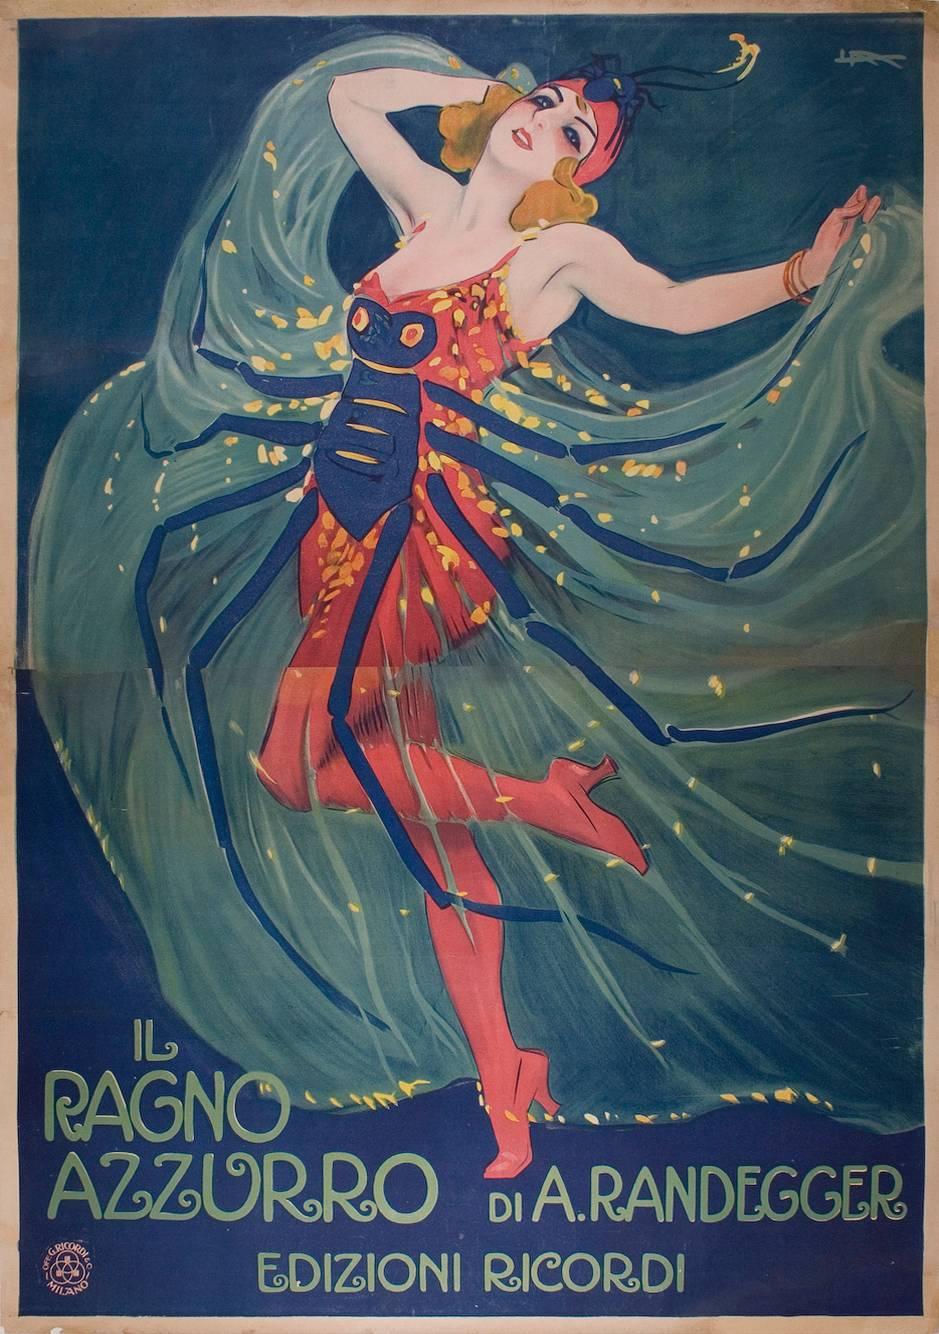 A rare Italian stone lithograph poster by Leopoldo Metlicovitz, 1912. This stunning two sheet piece advertises the operetta &quot;The Blue Spider,&quot; composed by A. Randegger. Metlicovitz (1868-1944) is considered one of the masters of Italian